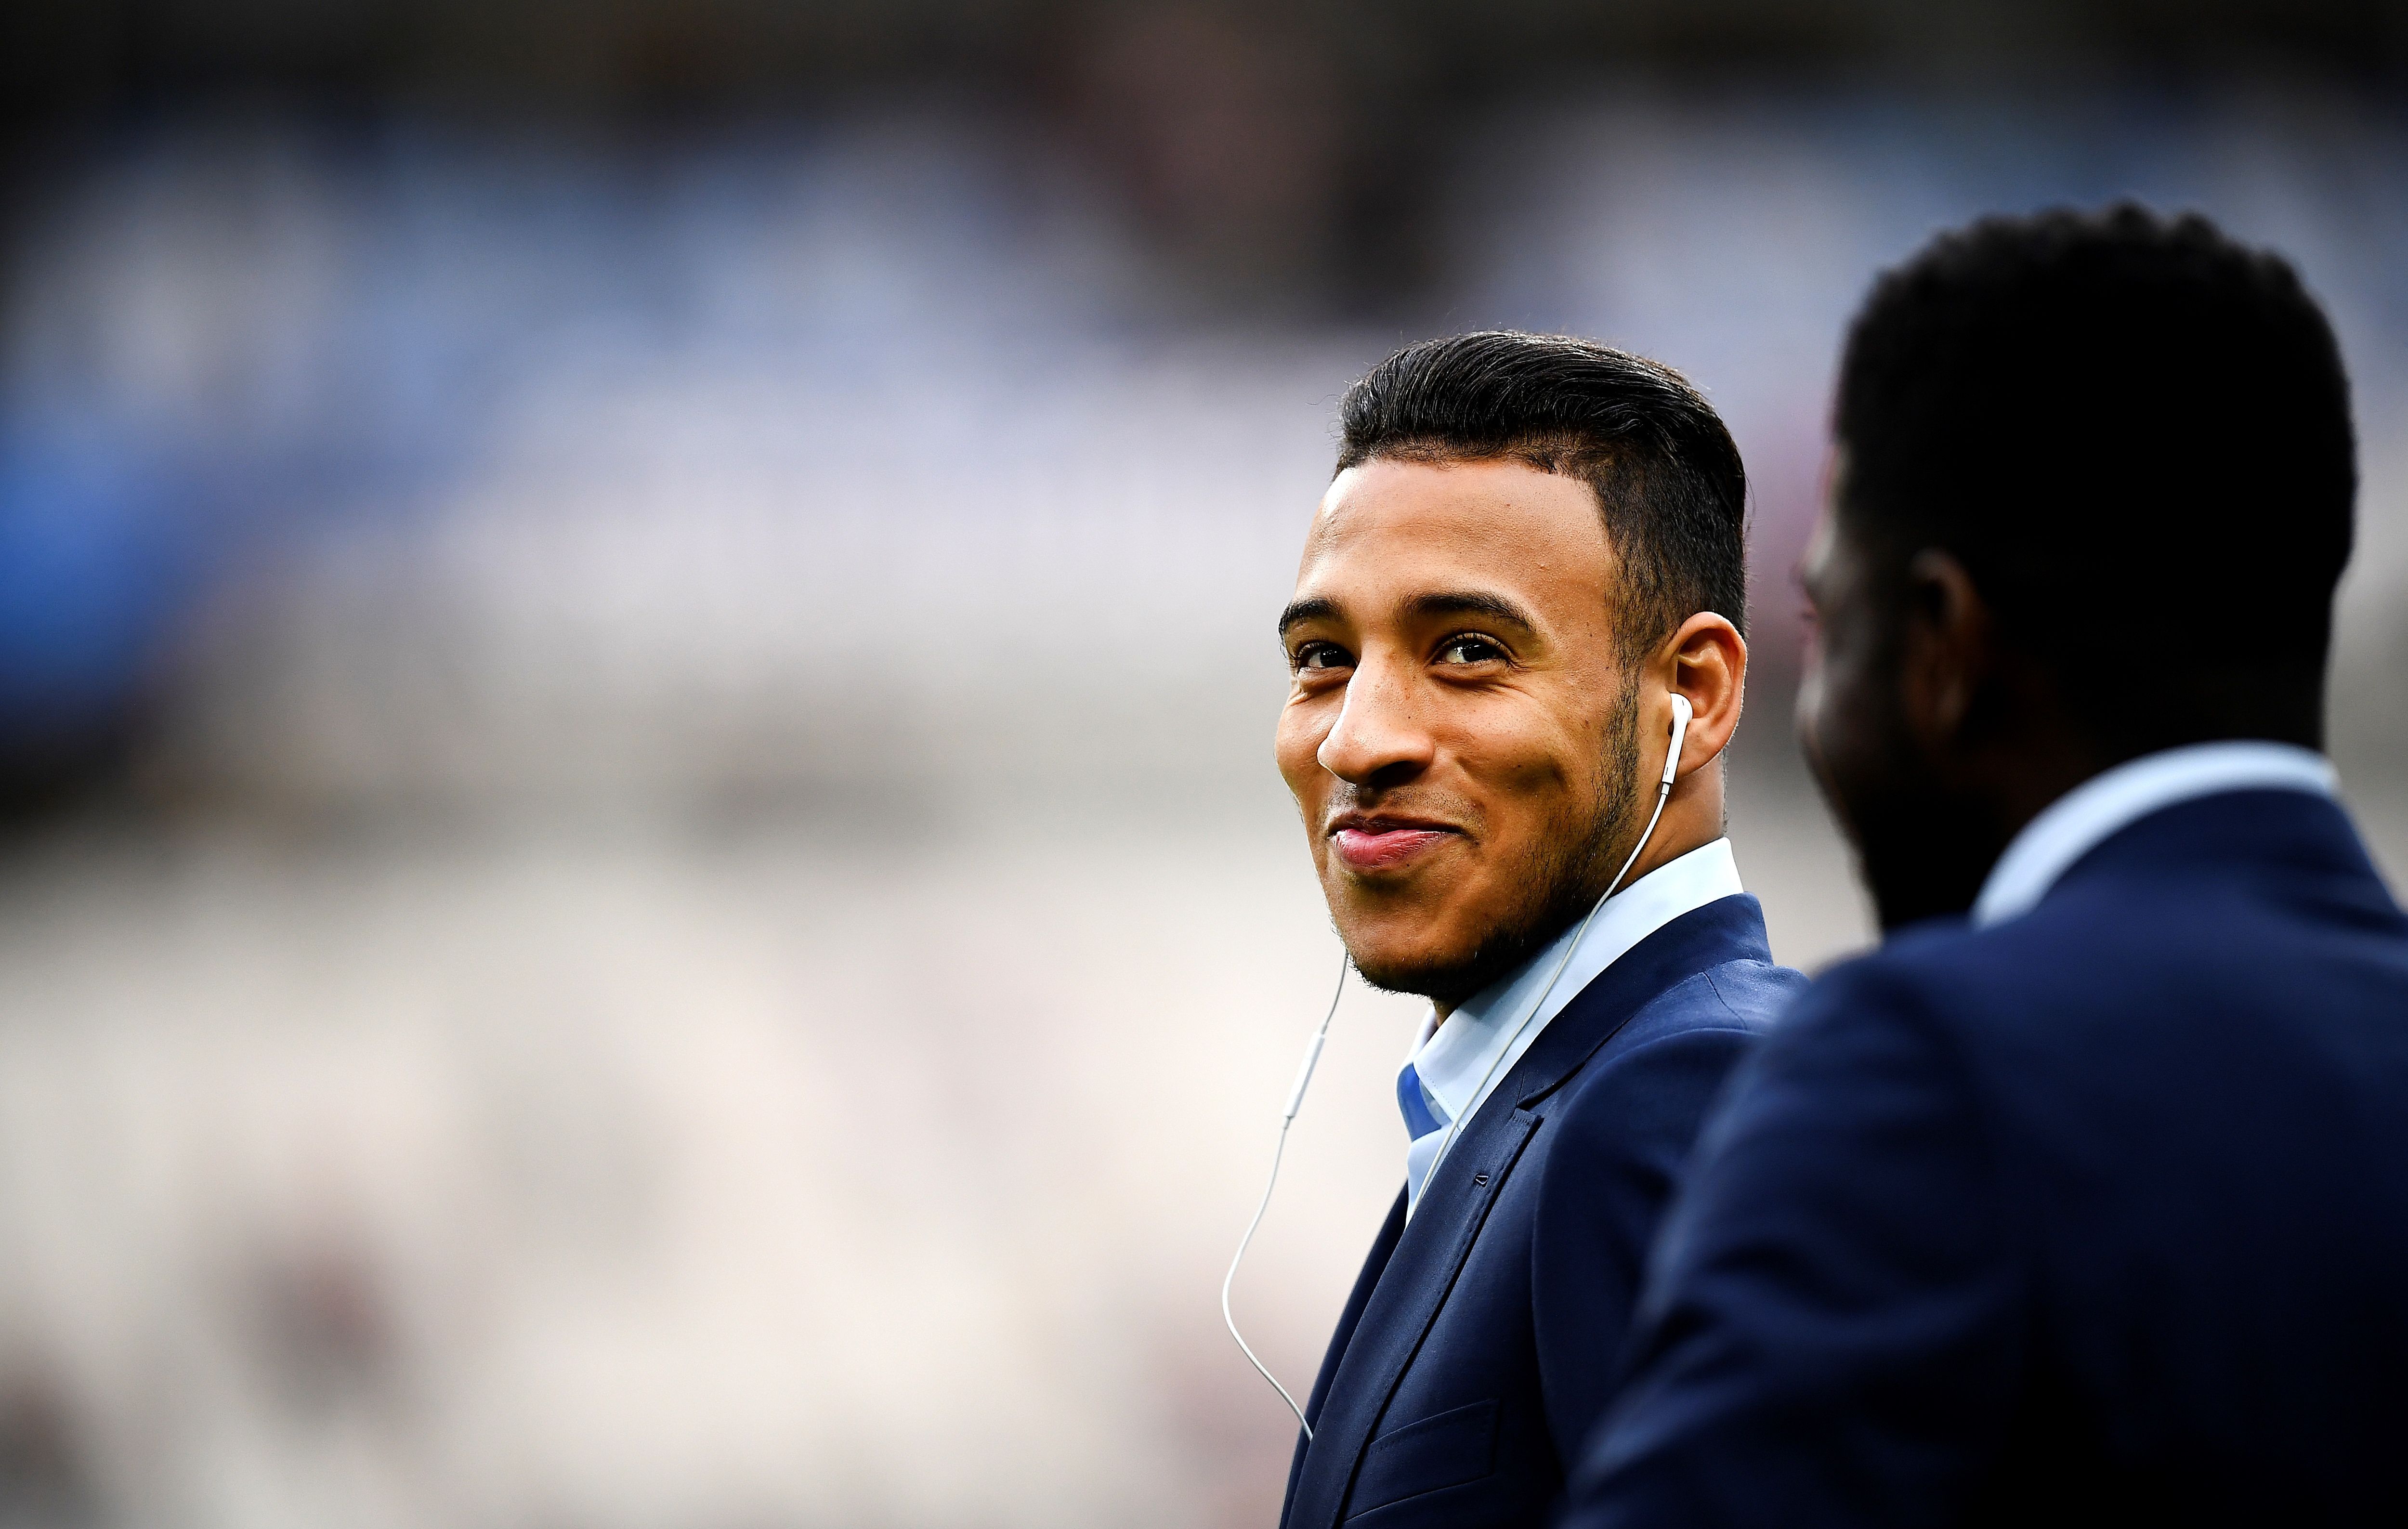 France's midfielder Corentin Tolisso smiles ahead of the friendly football match France vs Spain on March 28, 2017 at the Stade de France stadium in Saint-Denis, north of Paris.  / AFP PHOTO / FRANCK FIFE        (Photo credit should read FRANCK FIFE/AFP/Getty Images)